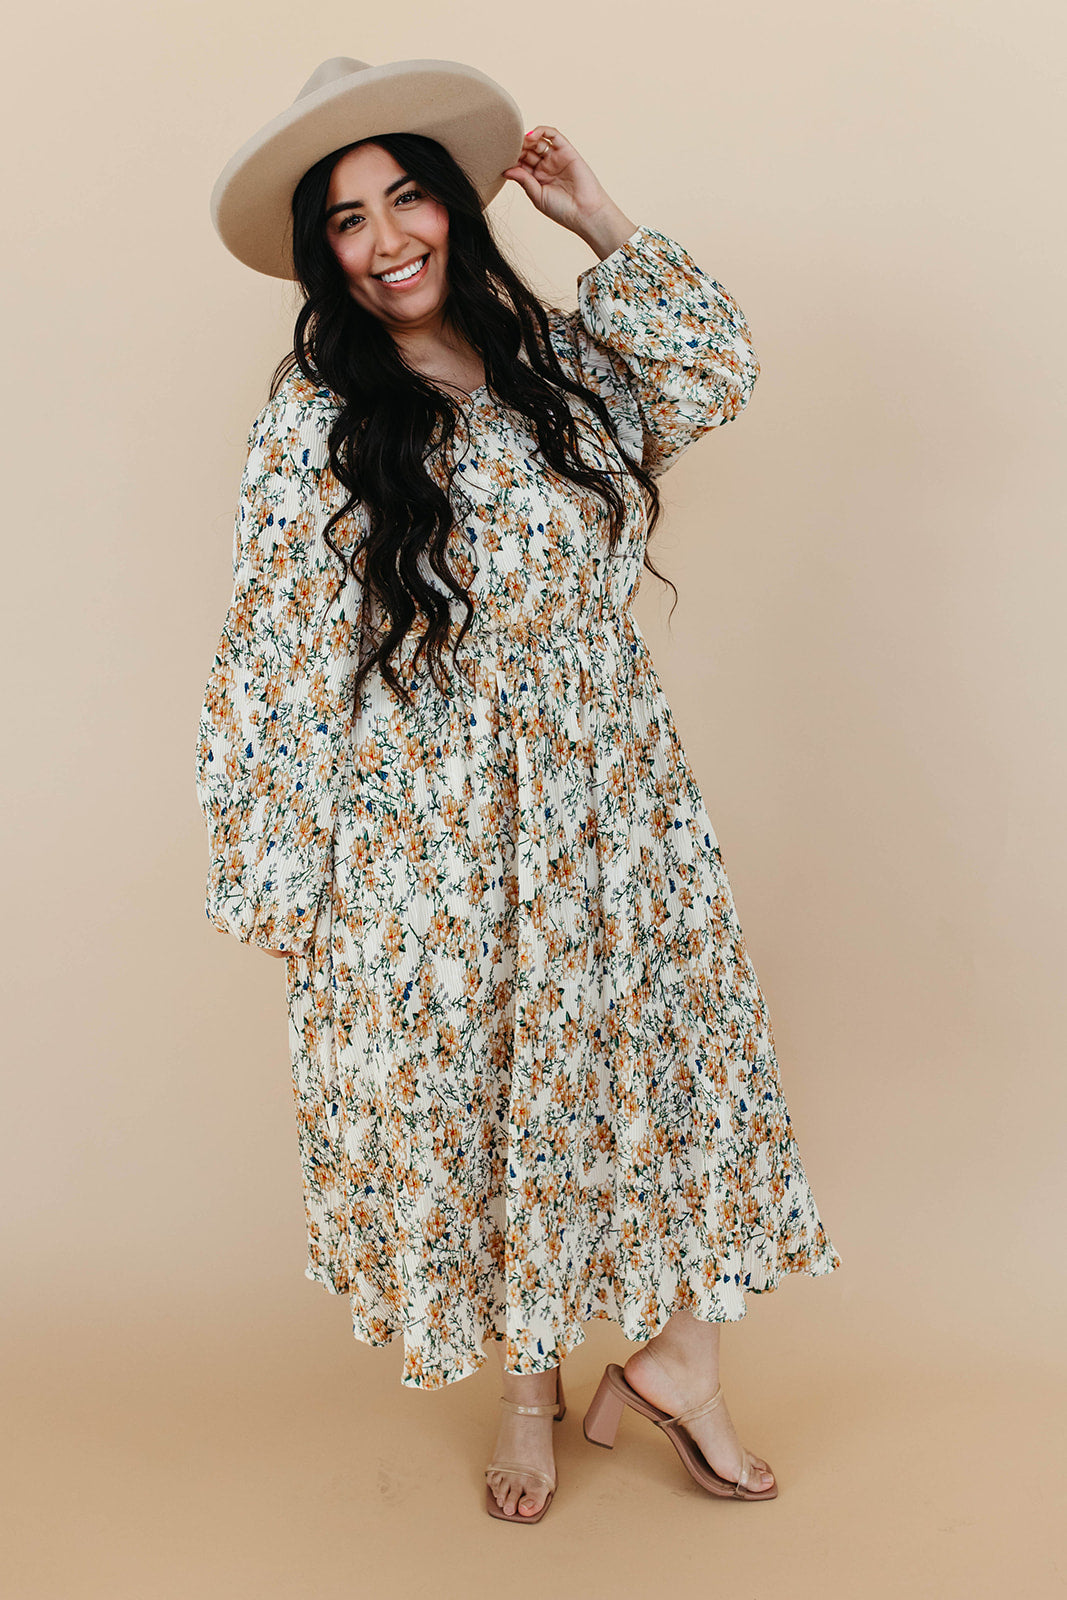 THE IVY DRESS IN IVORY FLORAL